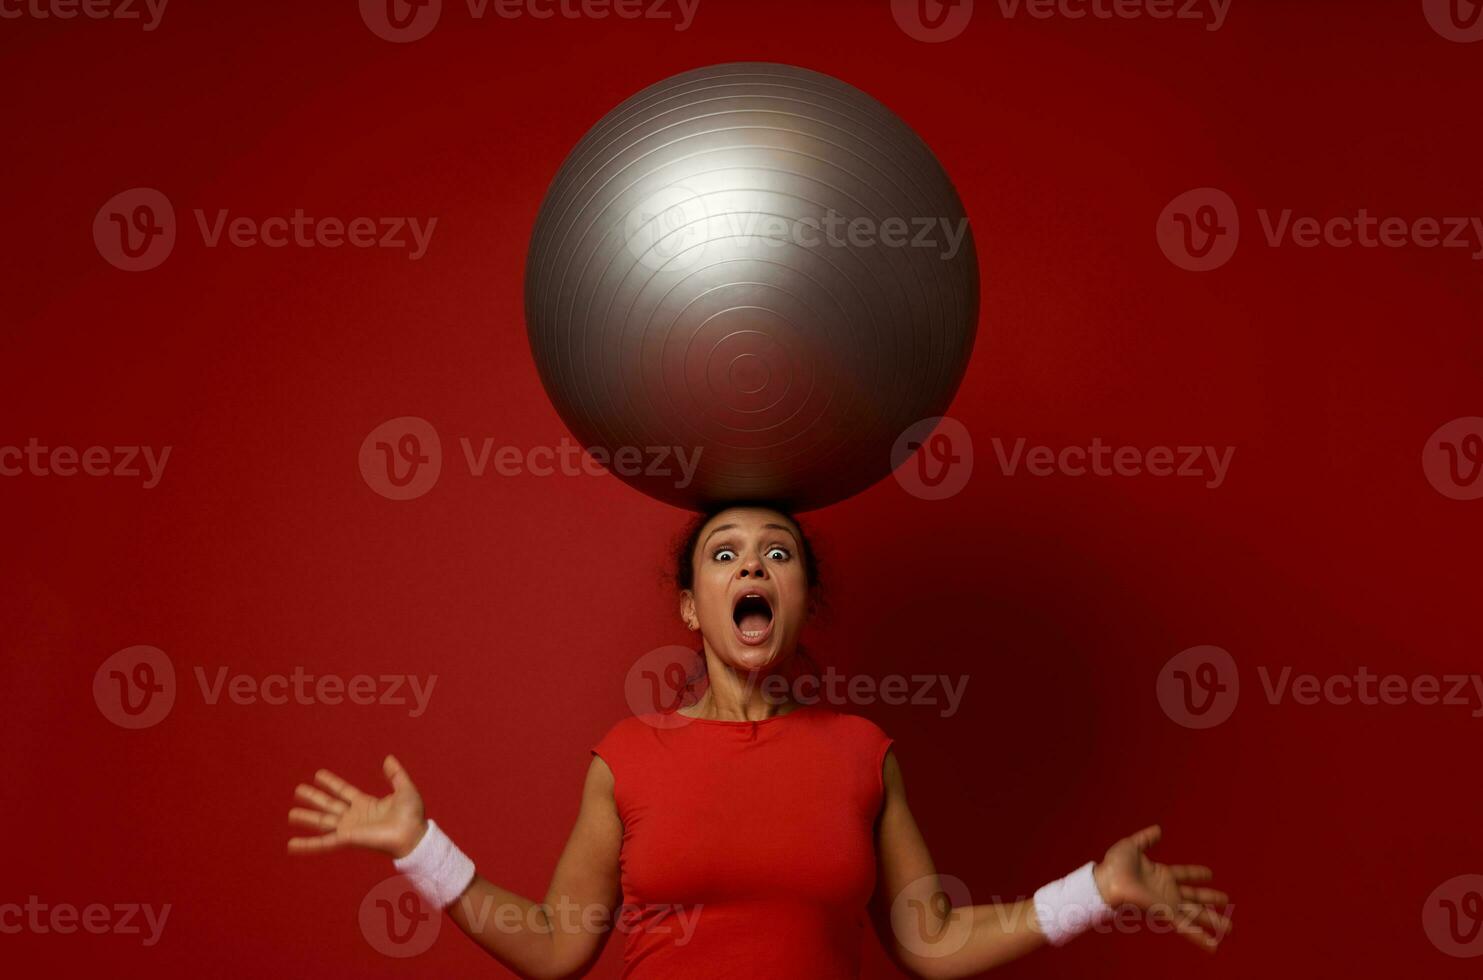 Astonished young sporty mixed race woman poses against red wall background with huge fitness ball on her head photo